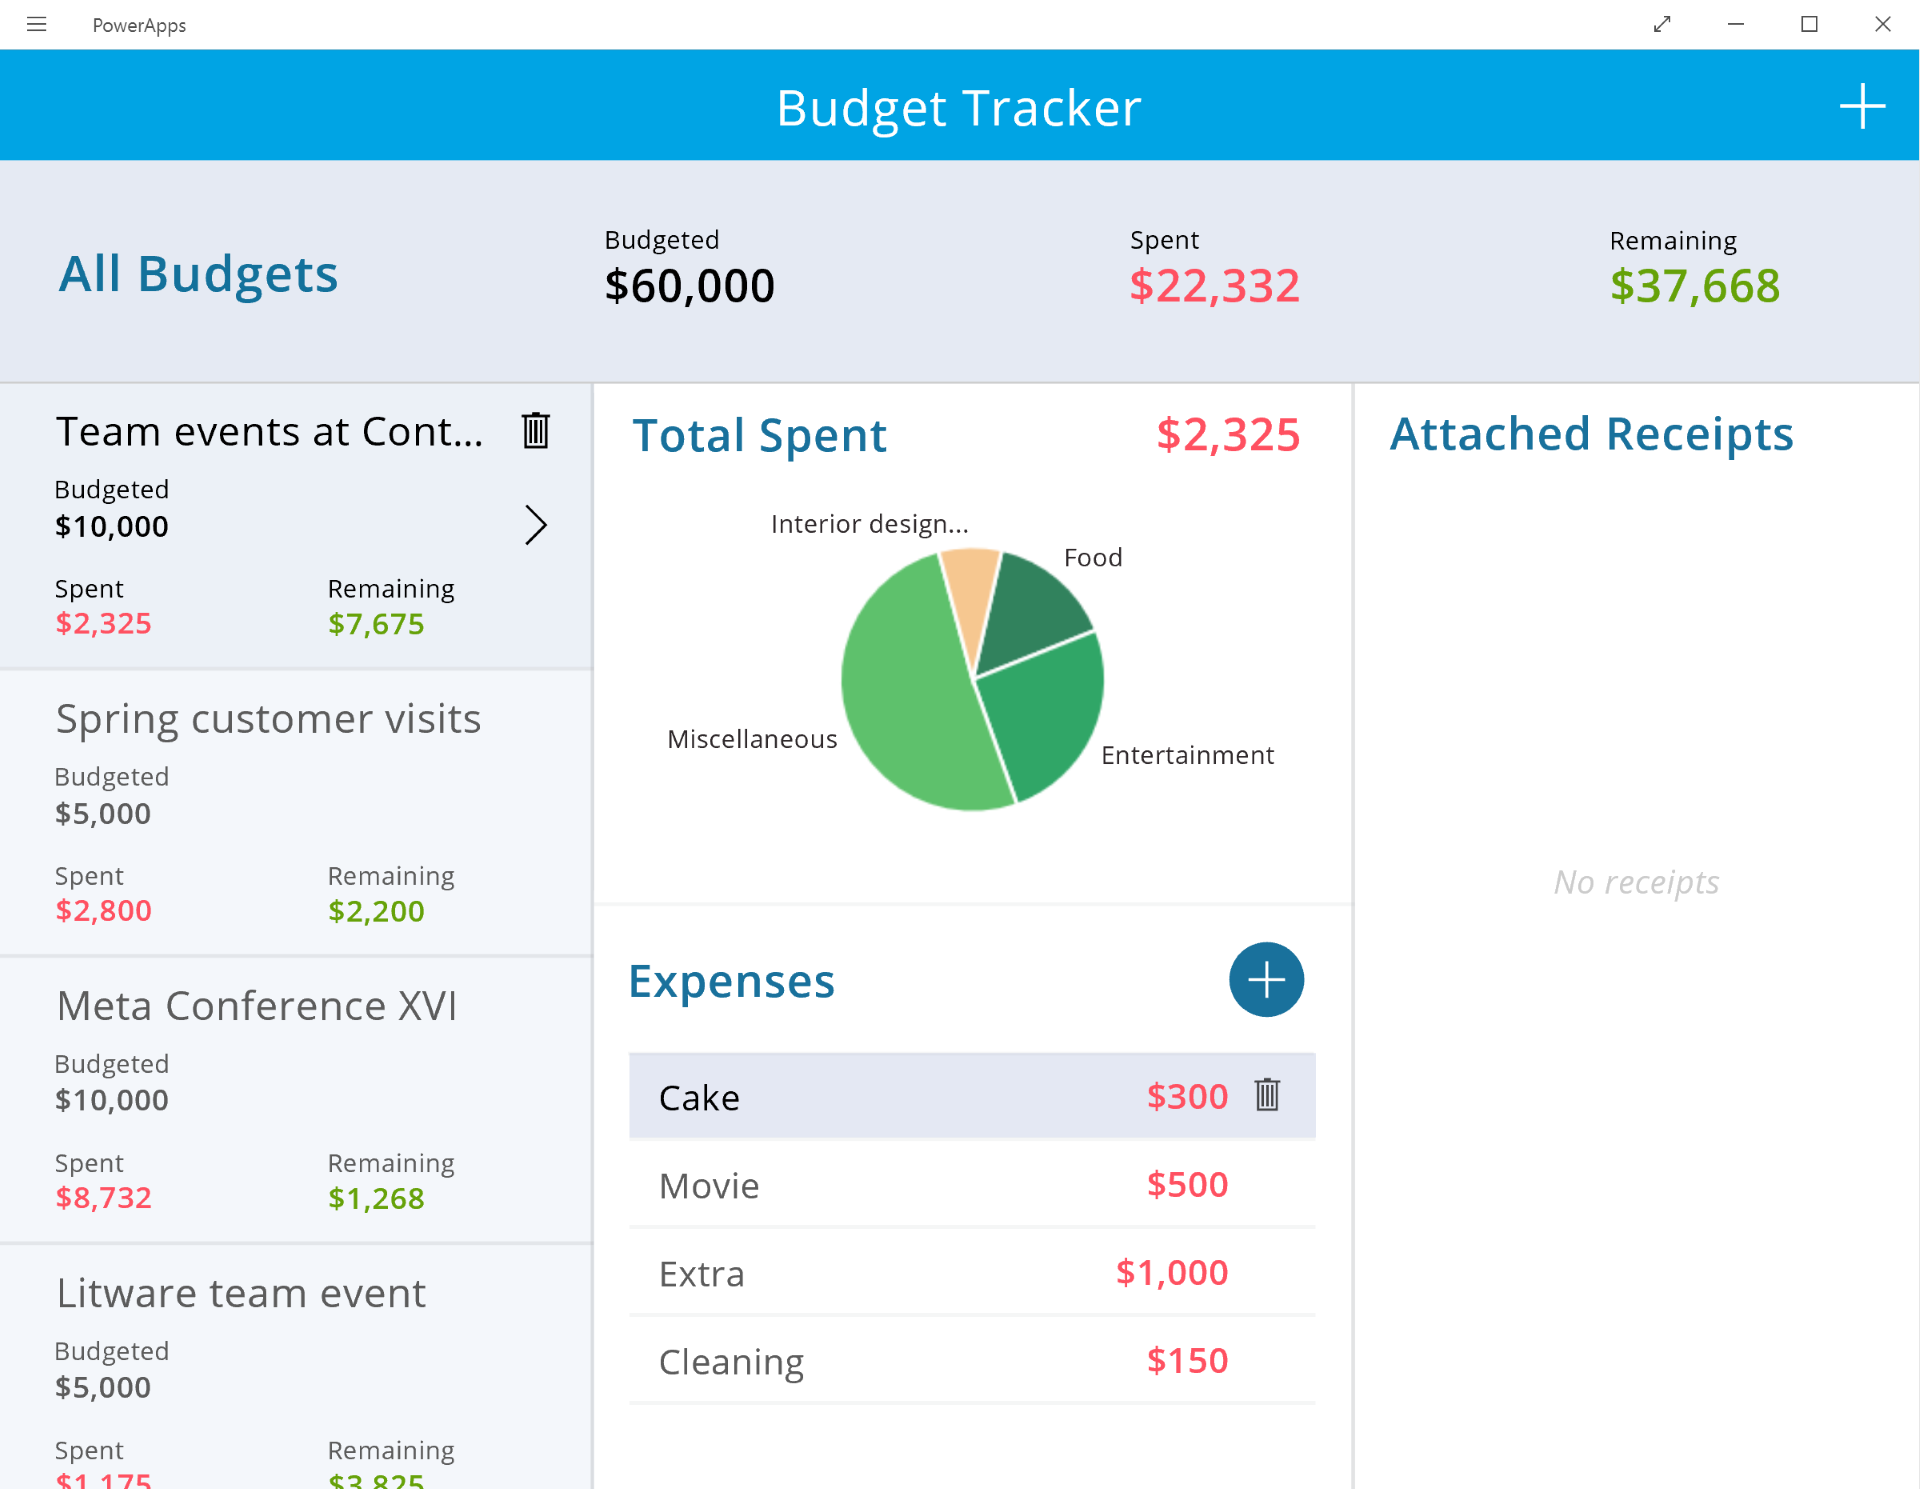 PowerApps Budget Tracker